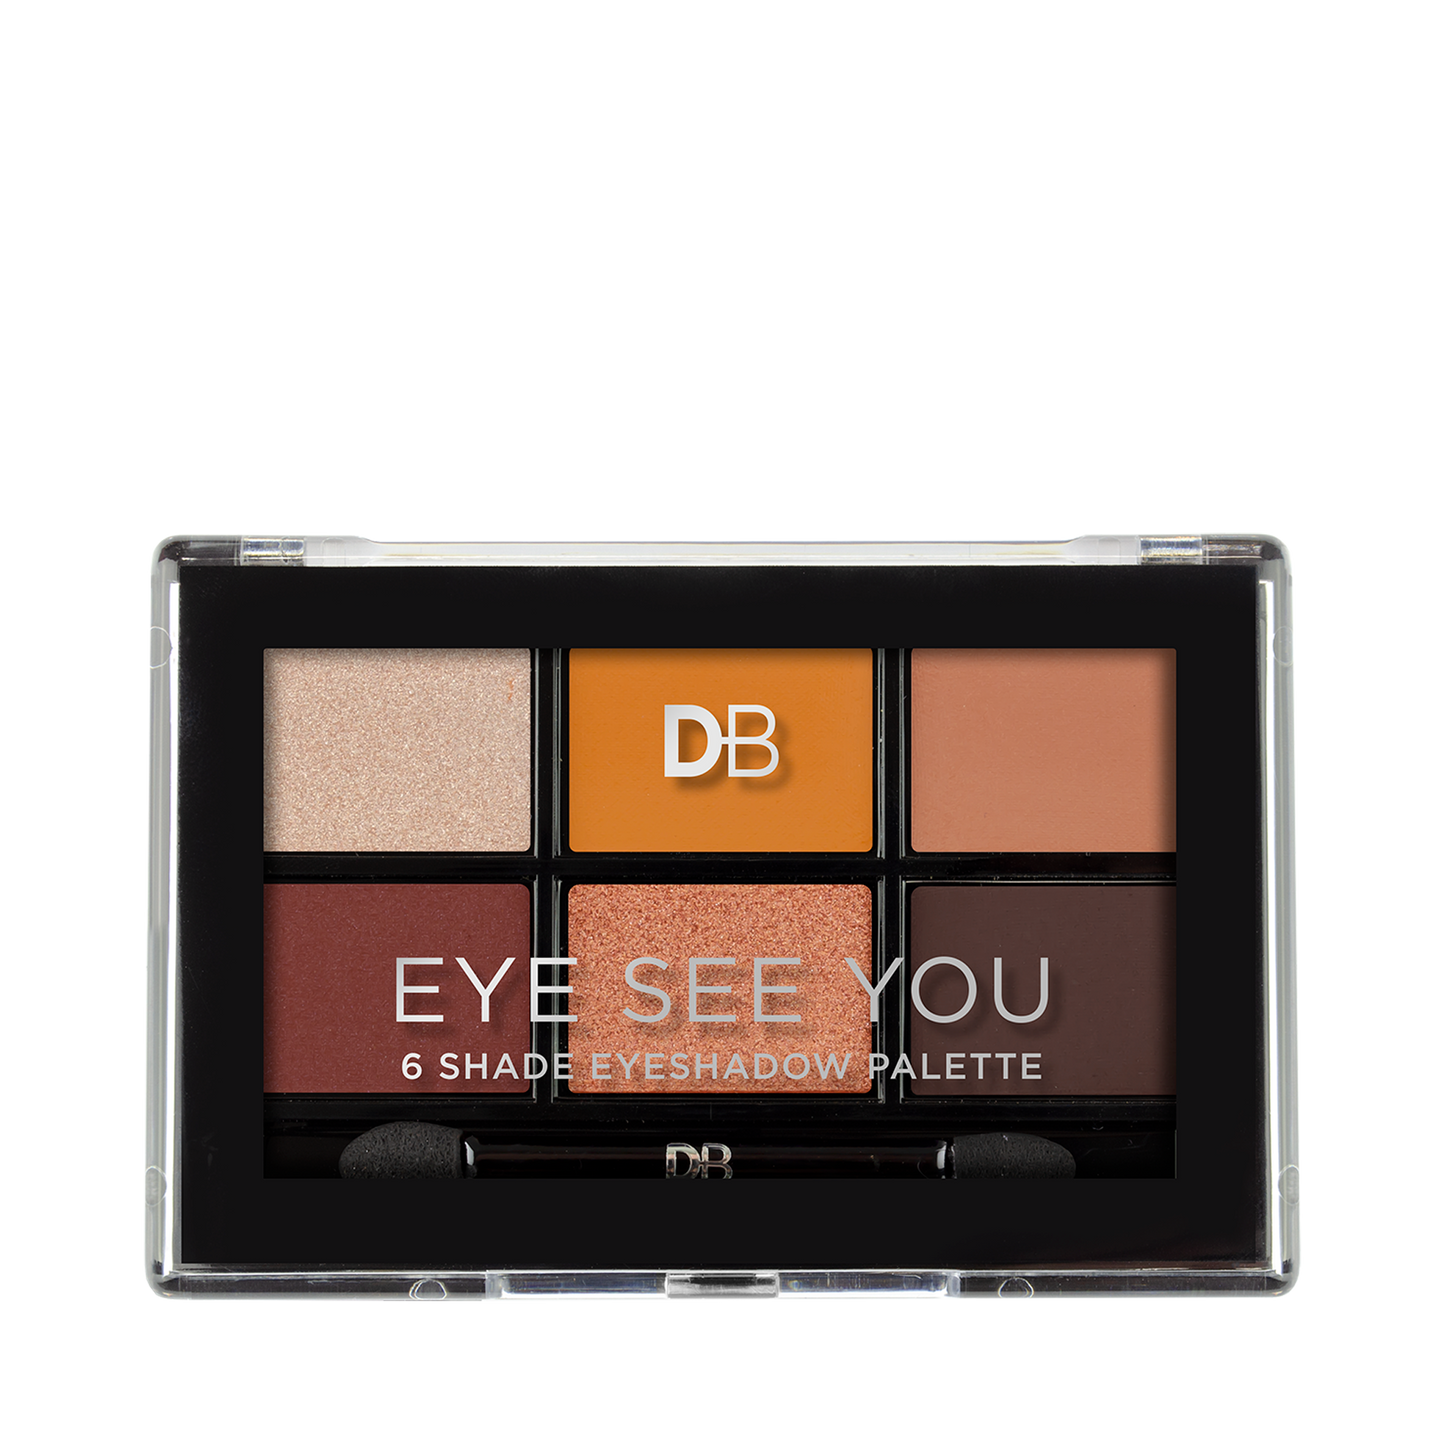 Eye See You 6 Shade Eyeshadow Palette (Fired Up) | DB Cosmetics